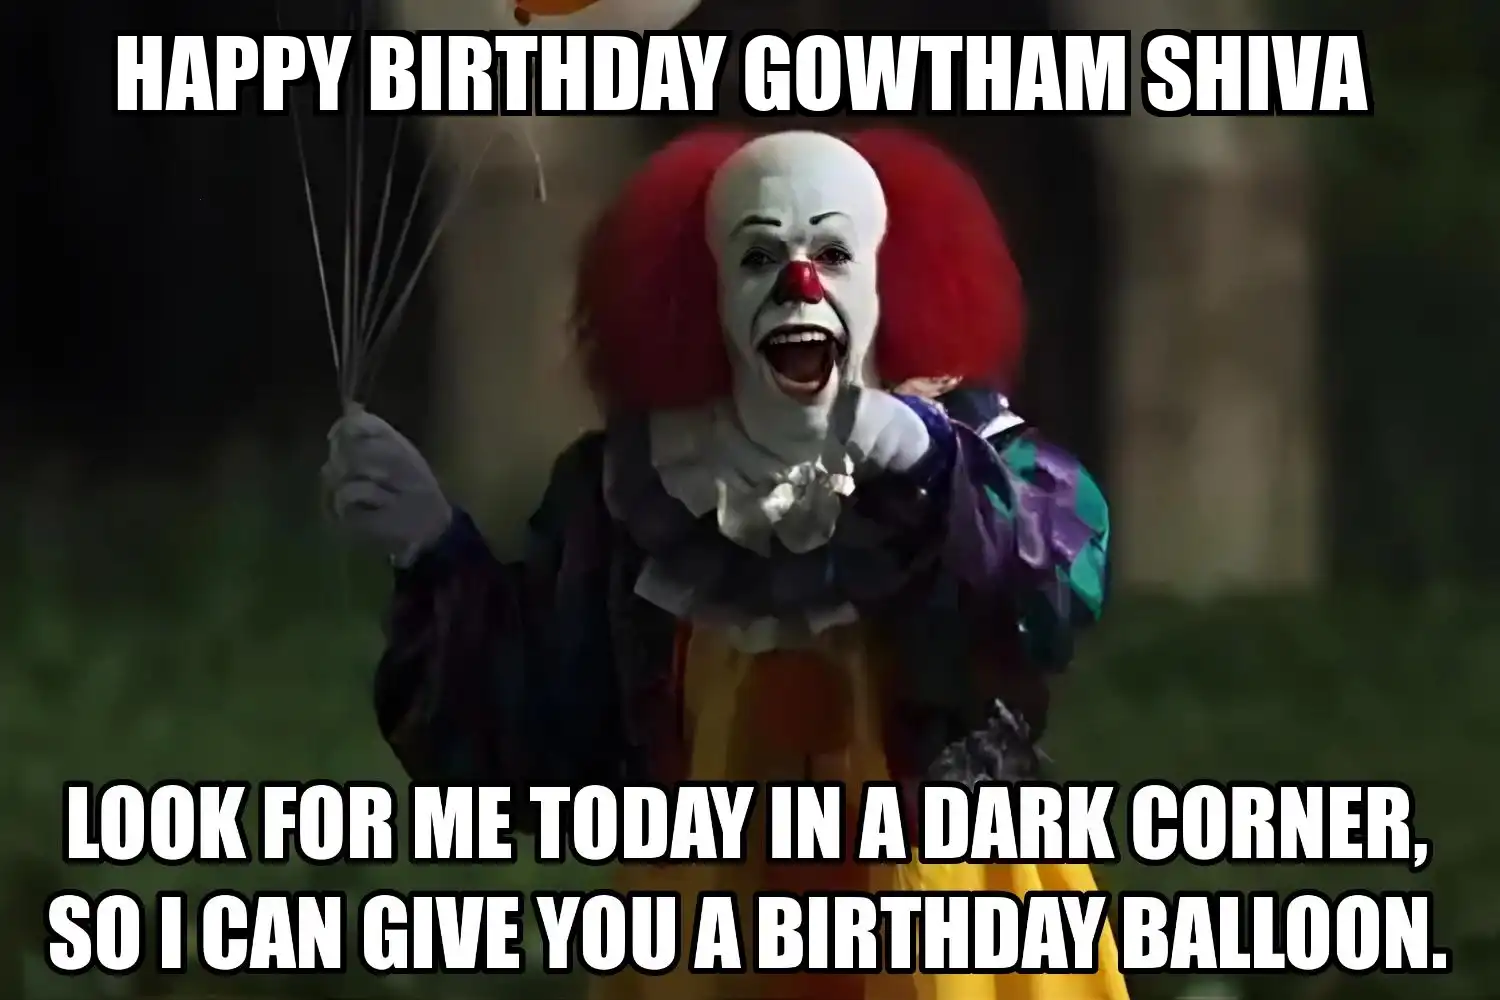 Happy Birthday Gowtham shiva I Can Give You A Balloon Meme